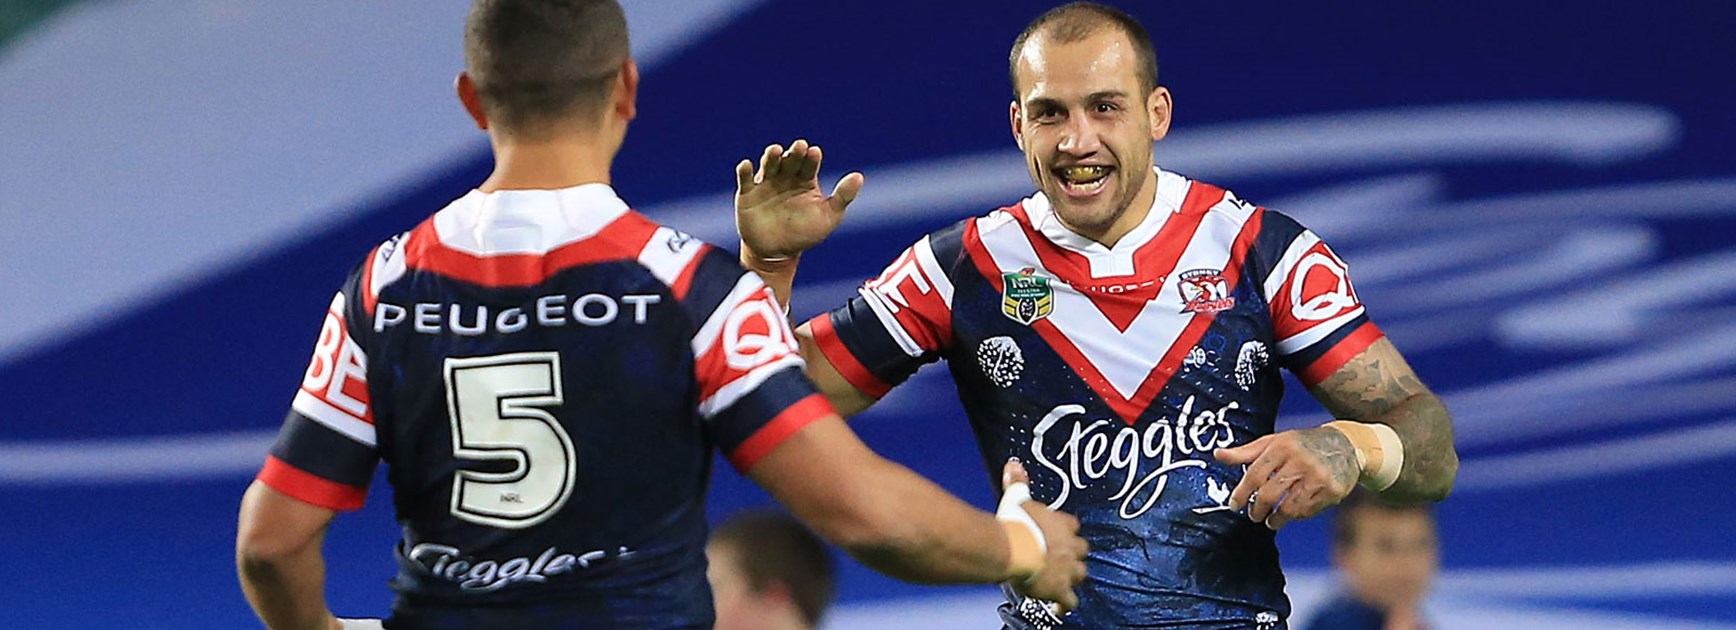 Roosters fullback Blake Ferguson was strong as his side downed the Broncos.